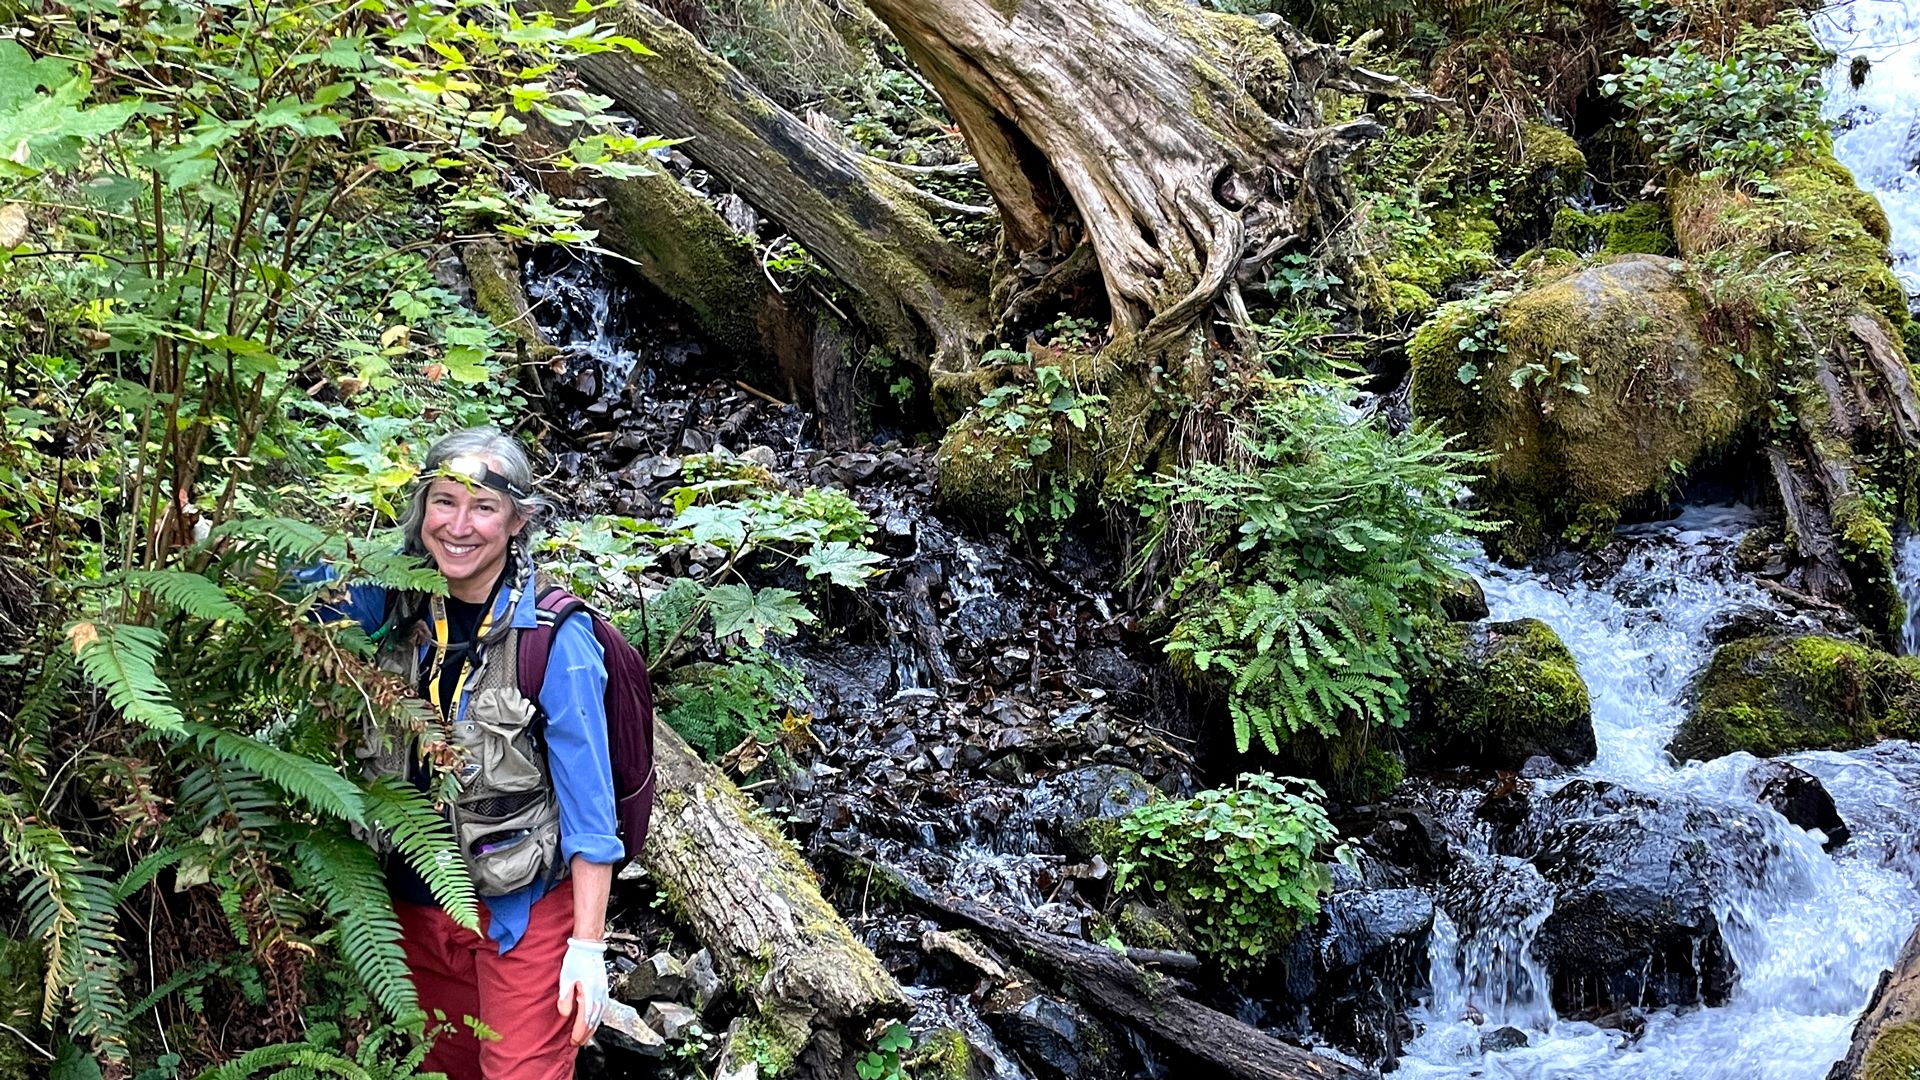 A woman wearing a headlamp, gloves and outdoor clothing stands in greenery next to a tumbling mountain stream.